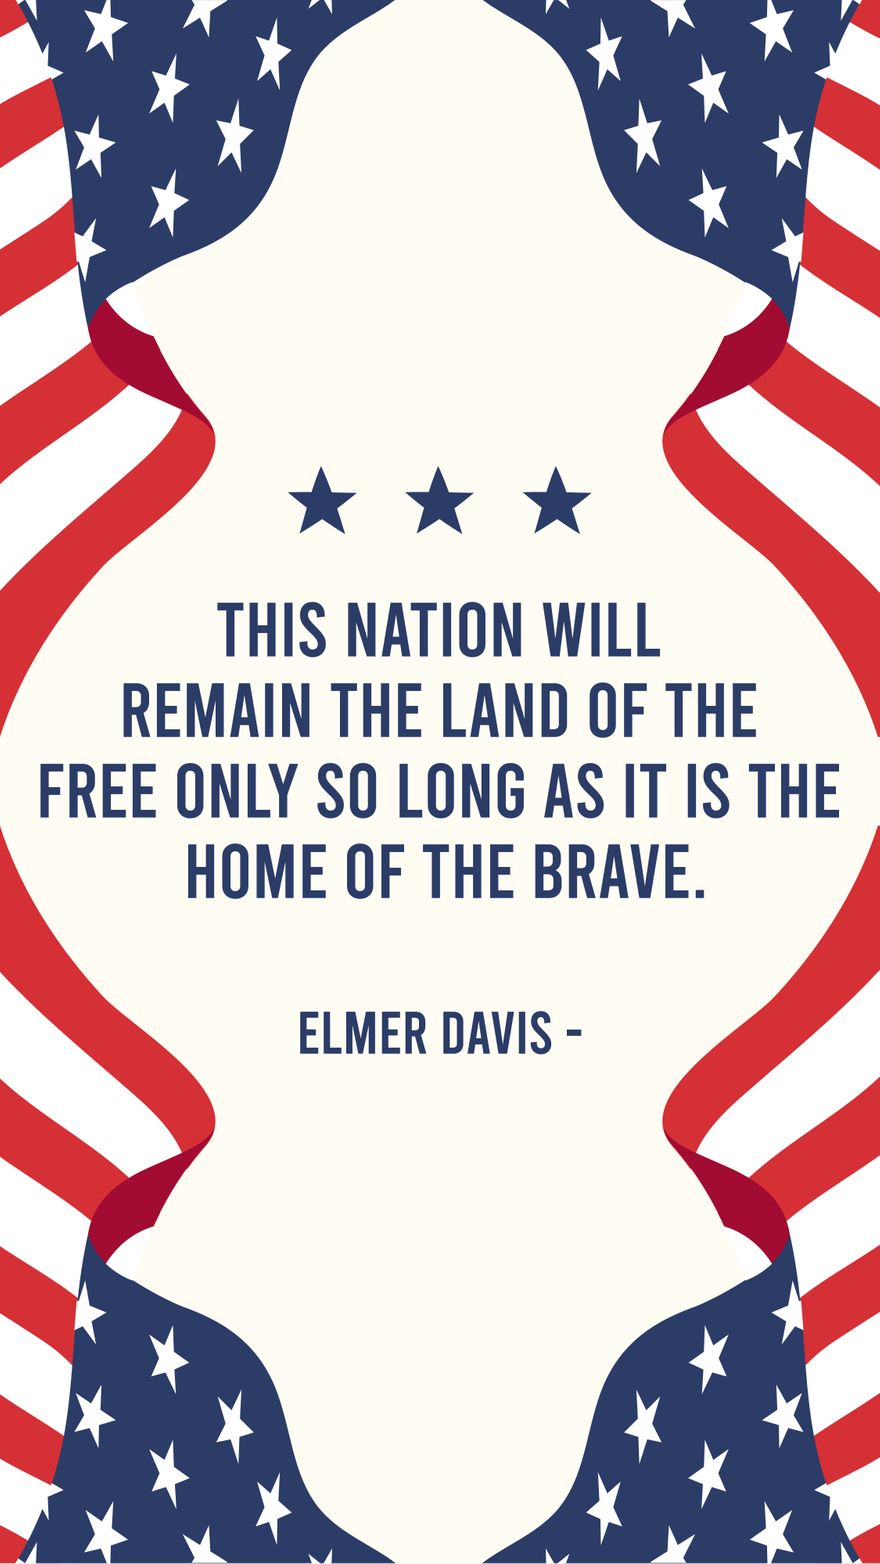 Elmer Davis - This nation will remain the land of the free only so long as it is the home of the brave.